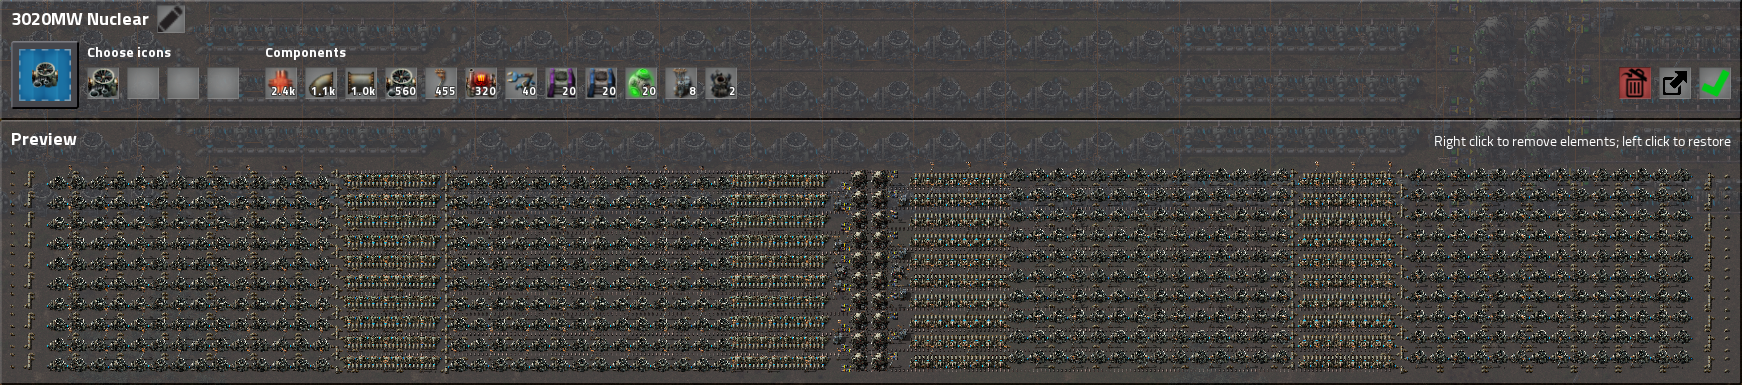 Nuclear 3040MW.png